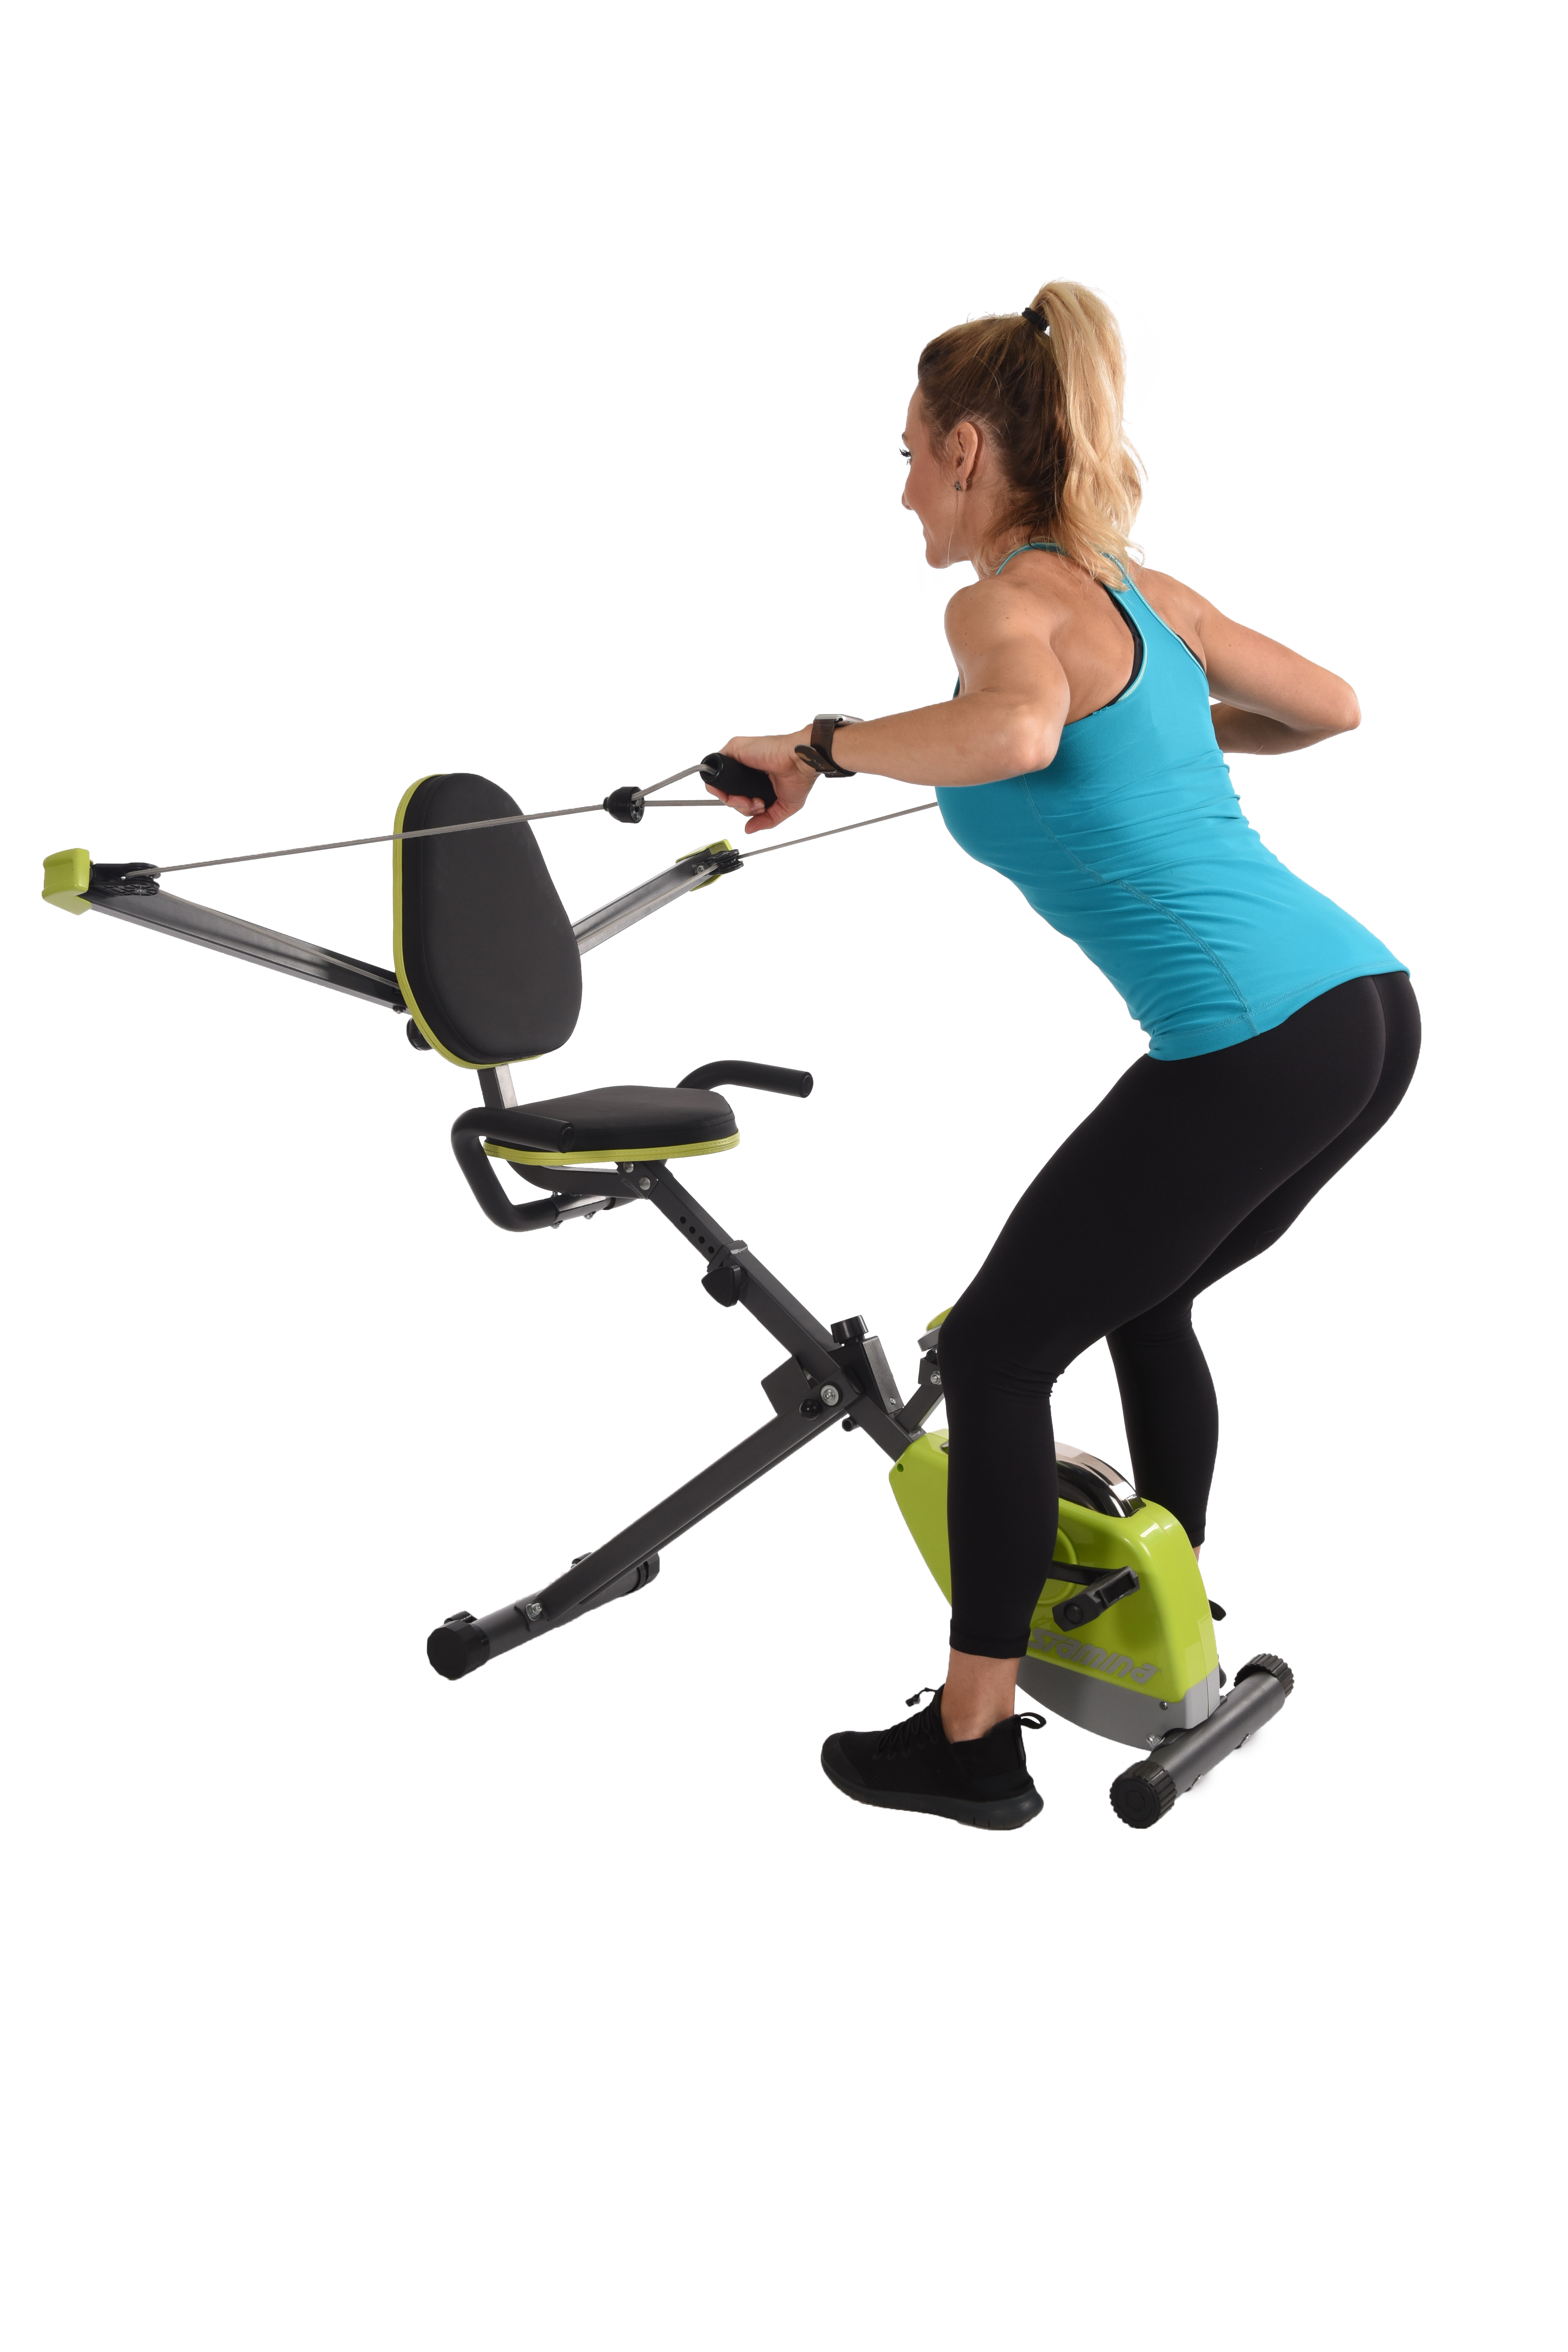 Performing standing rows on Stamina Wonder Exercise Bike With Strength System.